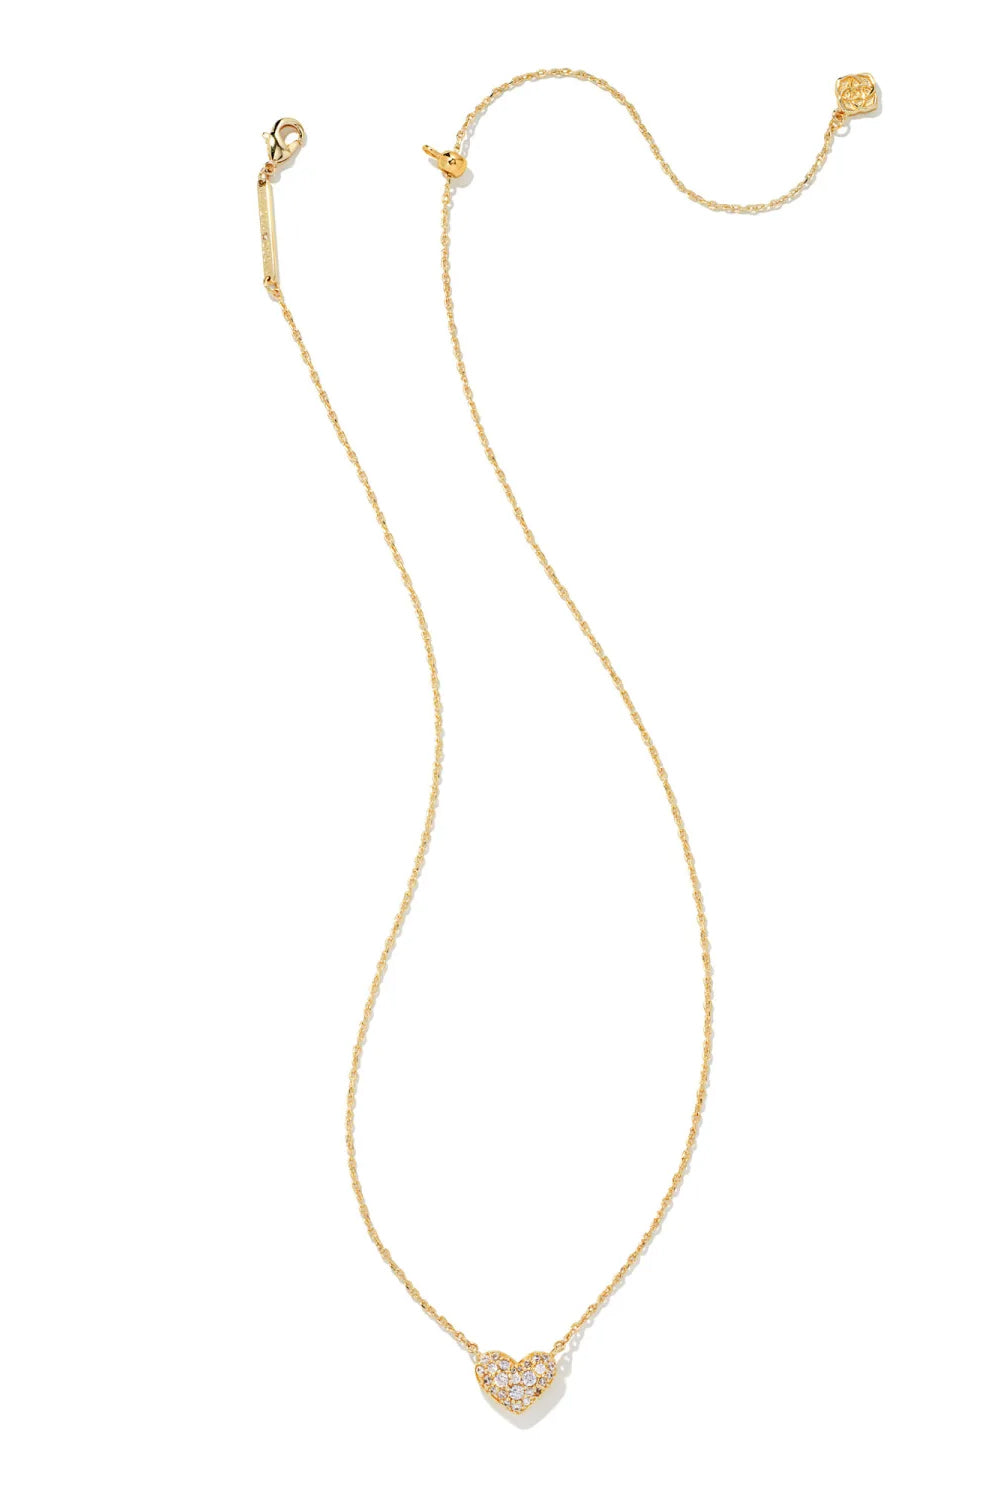 Kendra Scott Ari Pave Heart Necklace in White Cubic Zirconia – Smyth  Jewelers